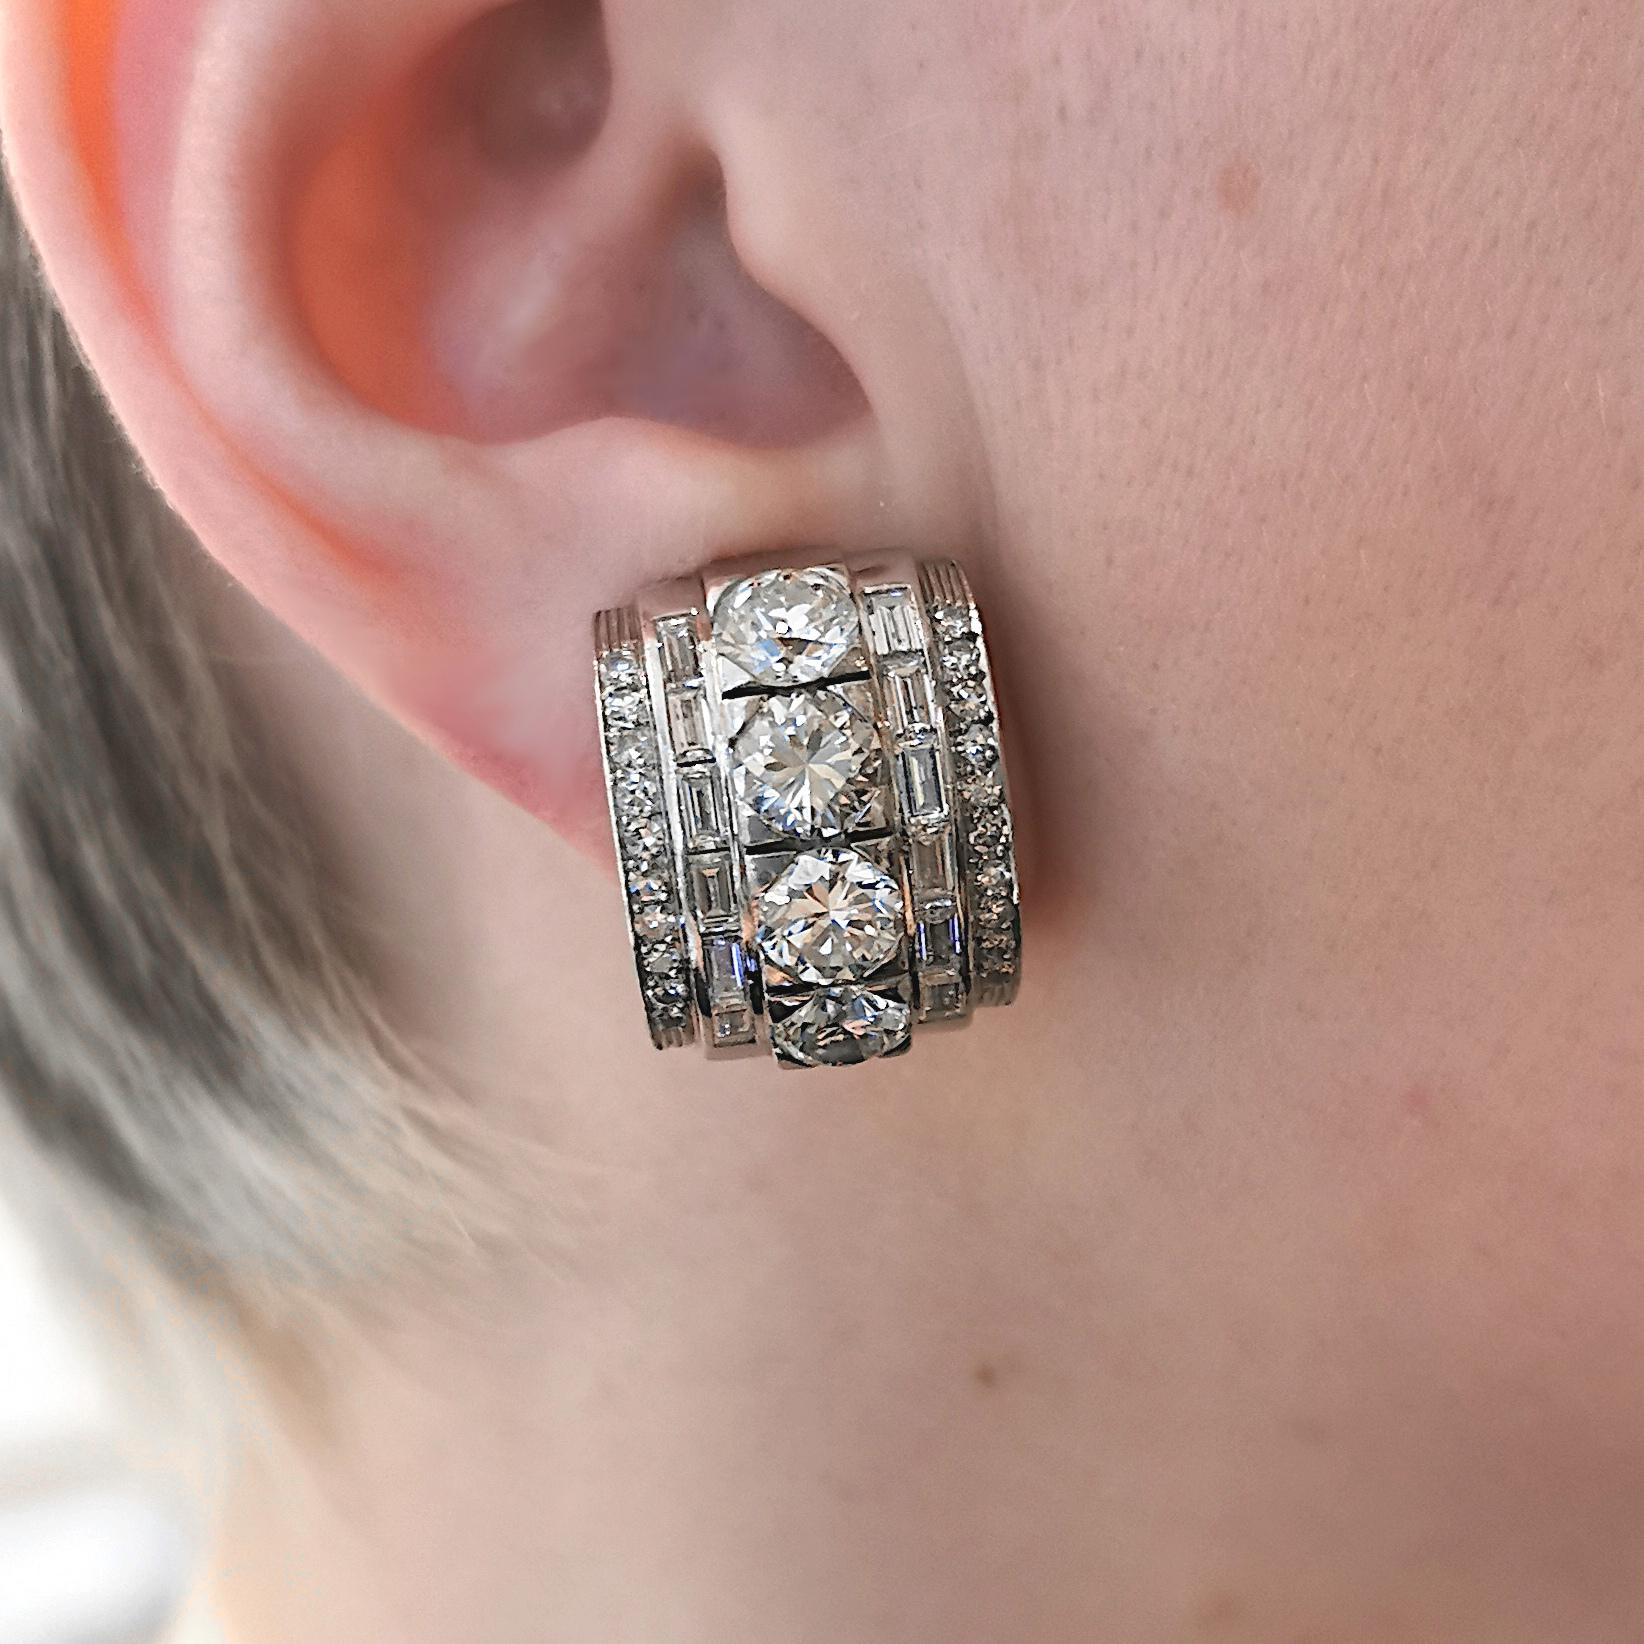 A pair of Art Deco diamond earrings, set with a central row of Edwardian-cut diamonds, with a row of baguette-cut diamonds either side, with round brilliant-cut,  and eight-cut diamonds set in the border, mounted in platinum, with yellow gold